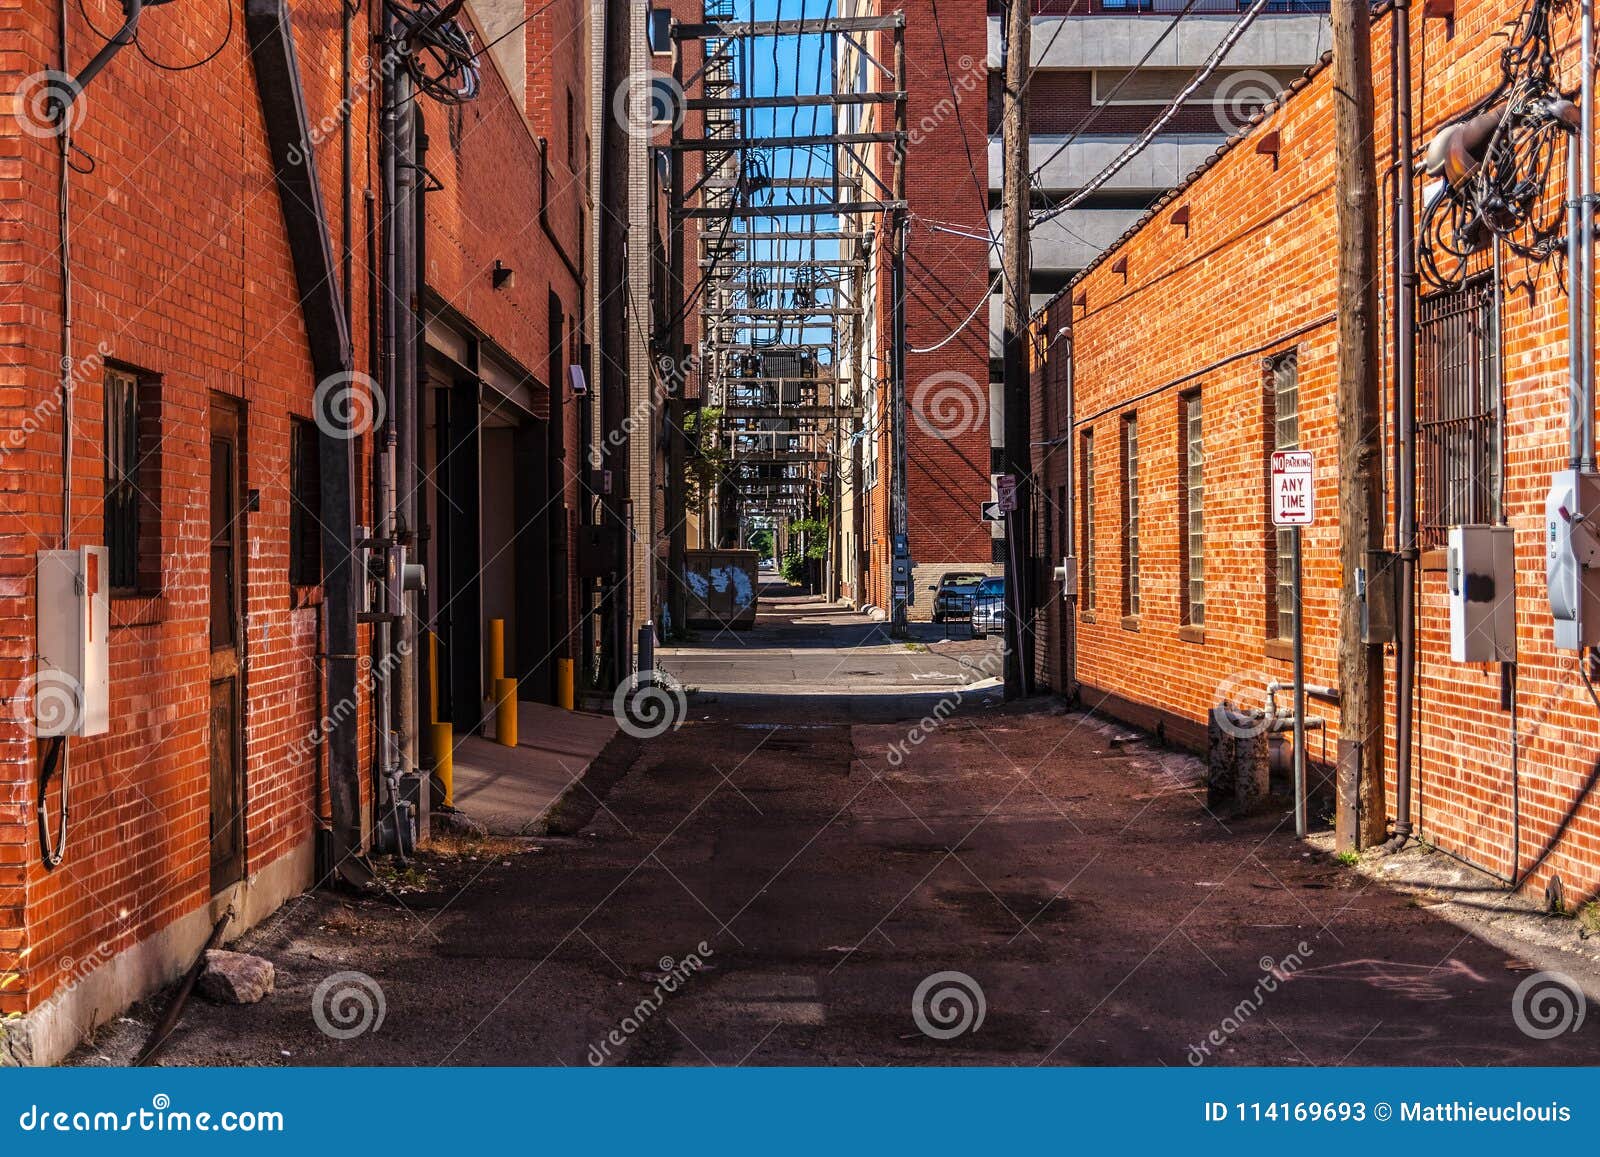 an alley with red brick buildings in amarillo